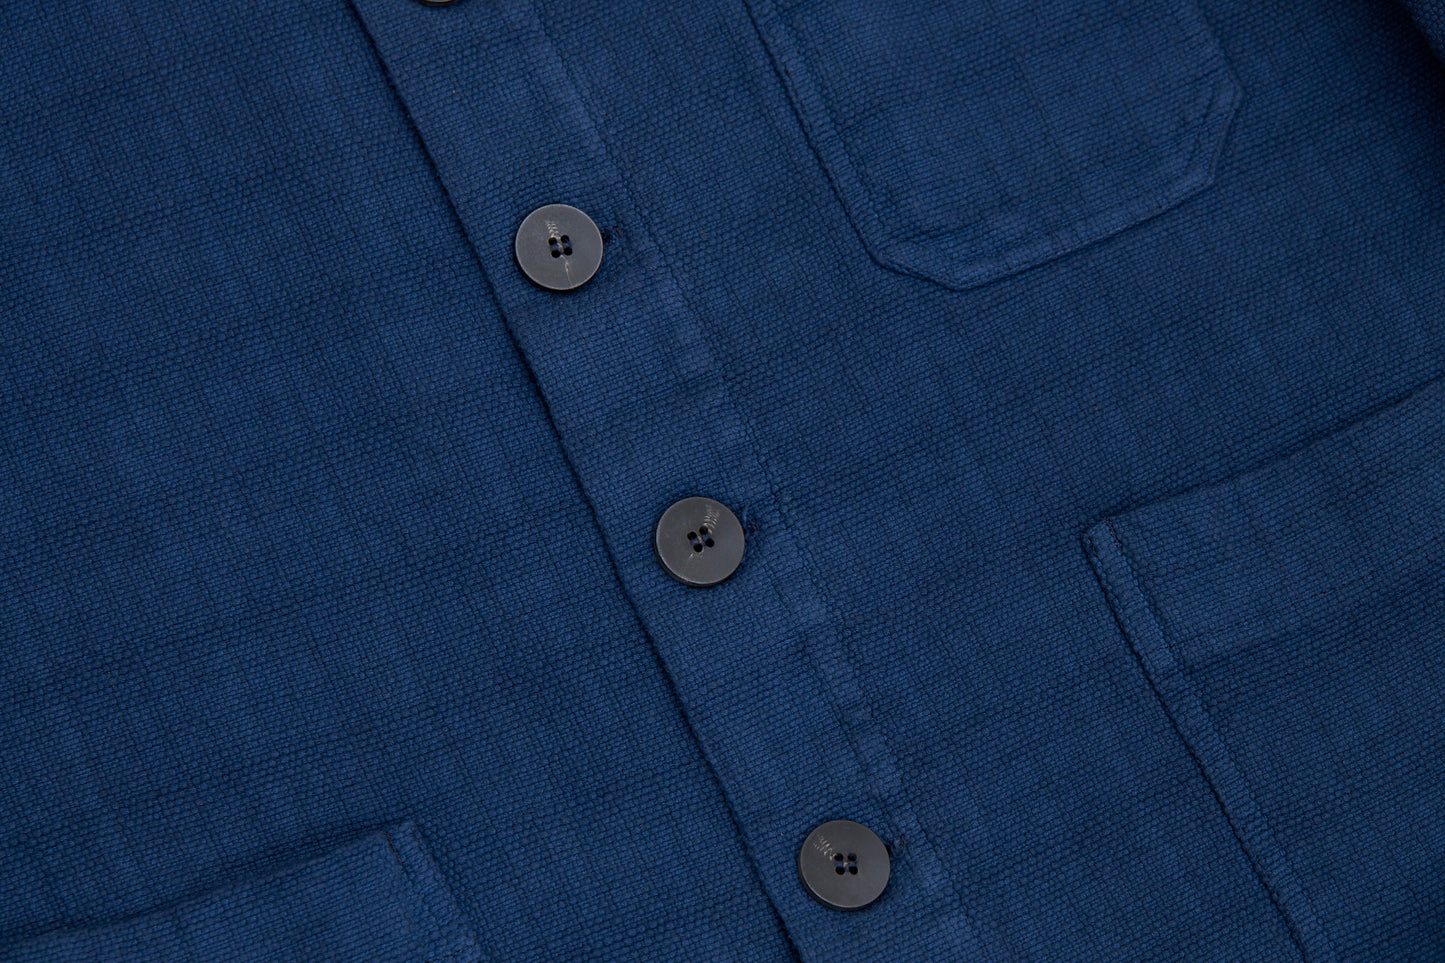 Propegator's Jacket without Liner - Handwoven Indigo Canvas